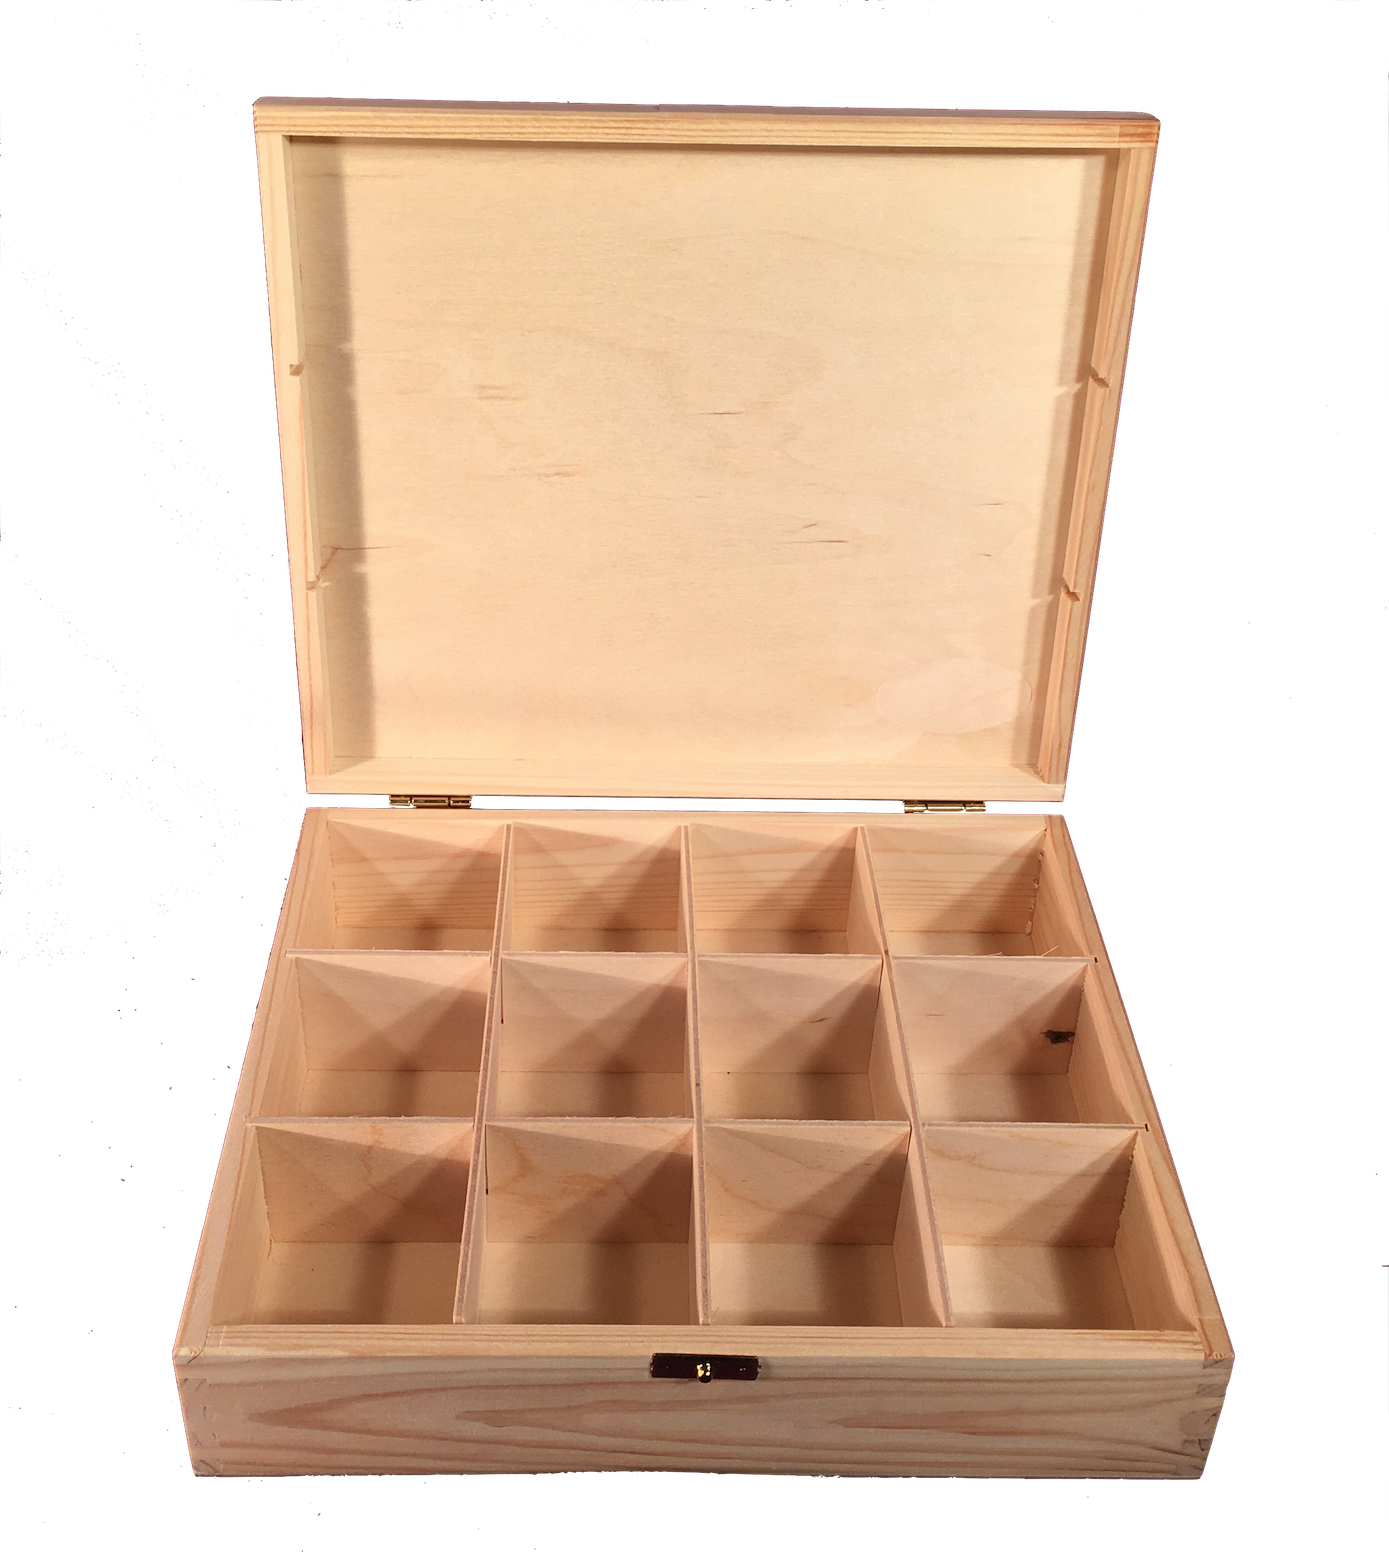 Arte-Direct Rustic Style Wooden Tea Box with 12 Compartments Made of Wood 